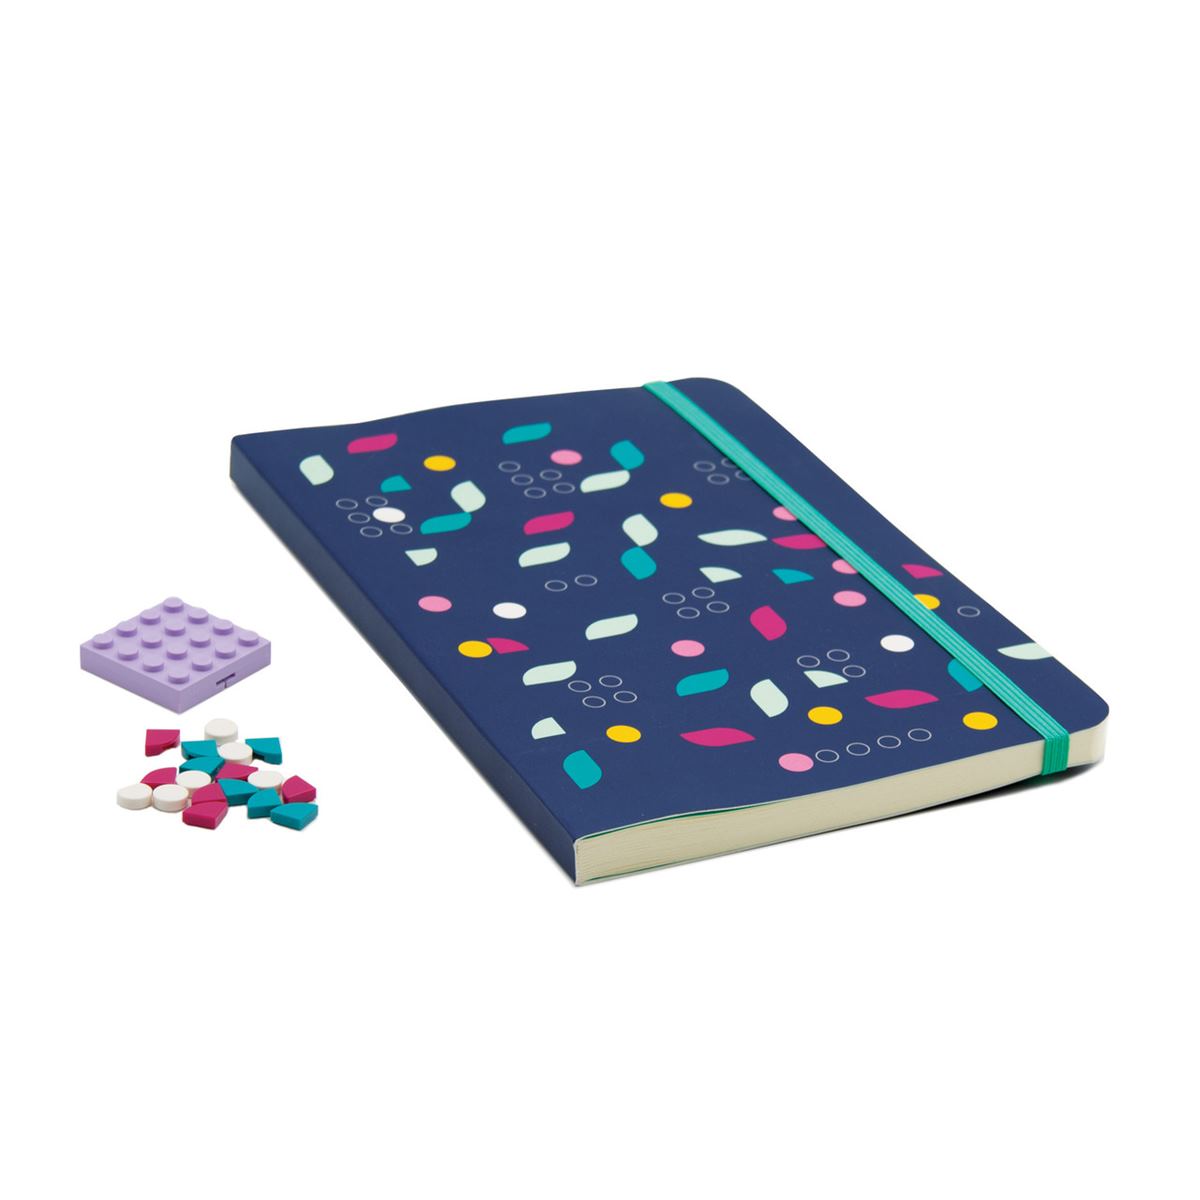 Lego Dots Notebook With Charm